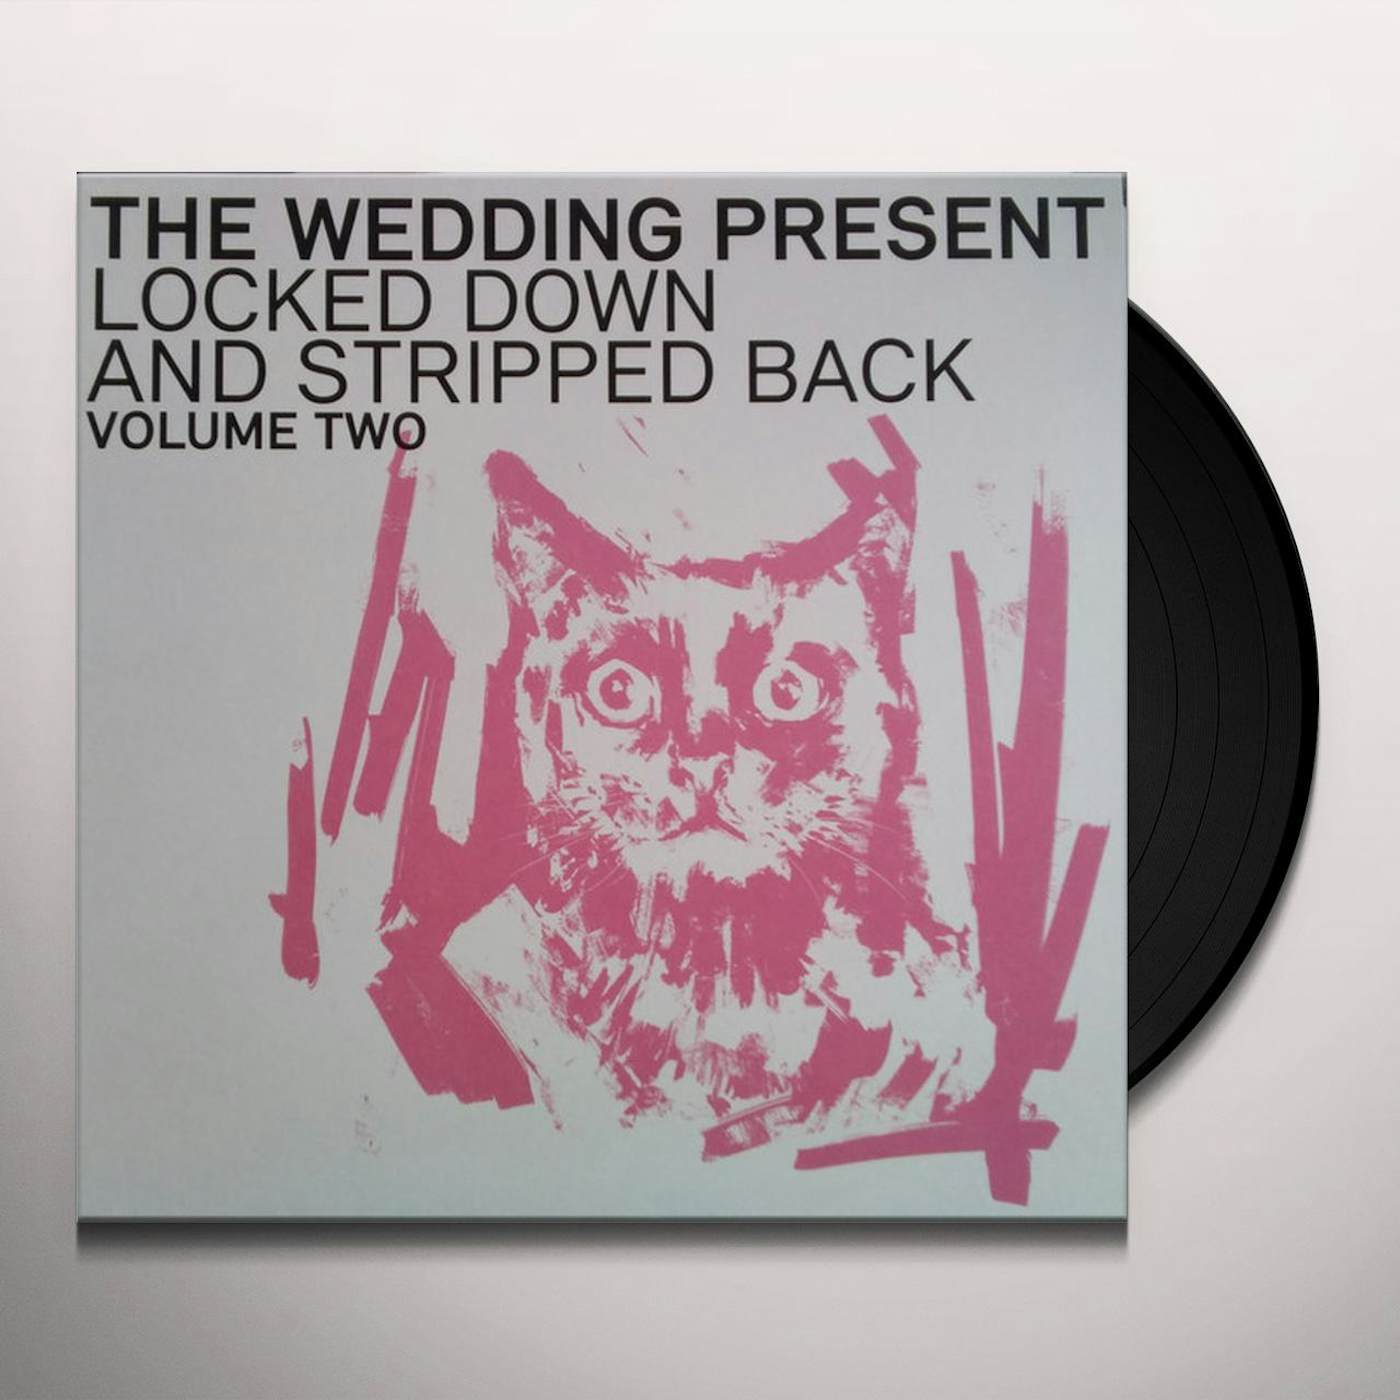 The Wedding Present Locked Down & Stripped Back Volume Two Vinyl Record